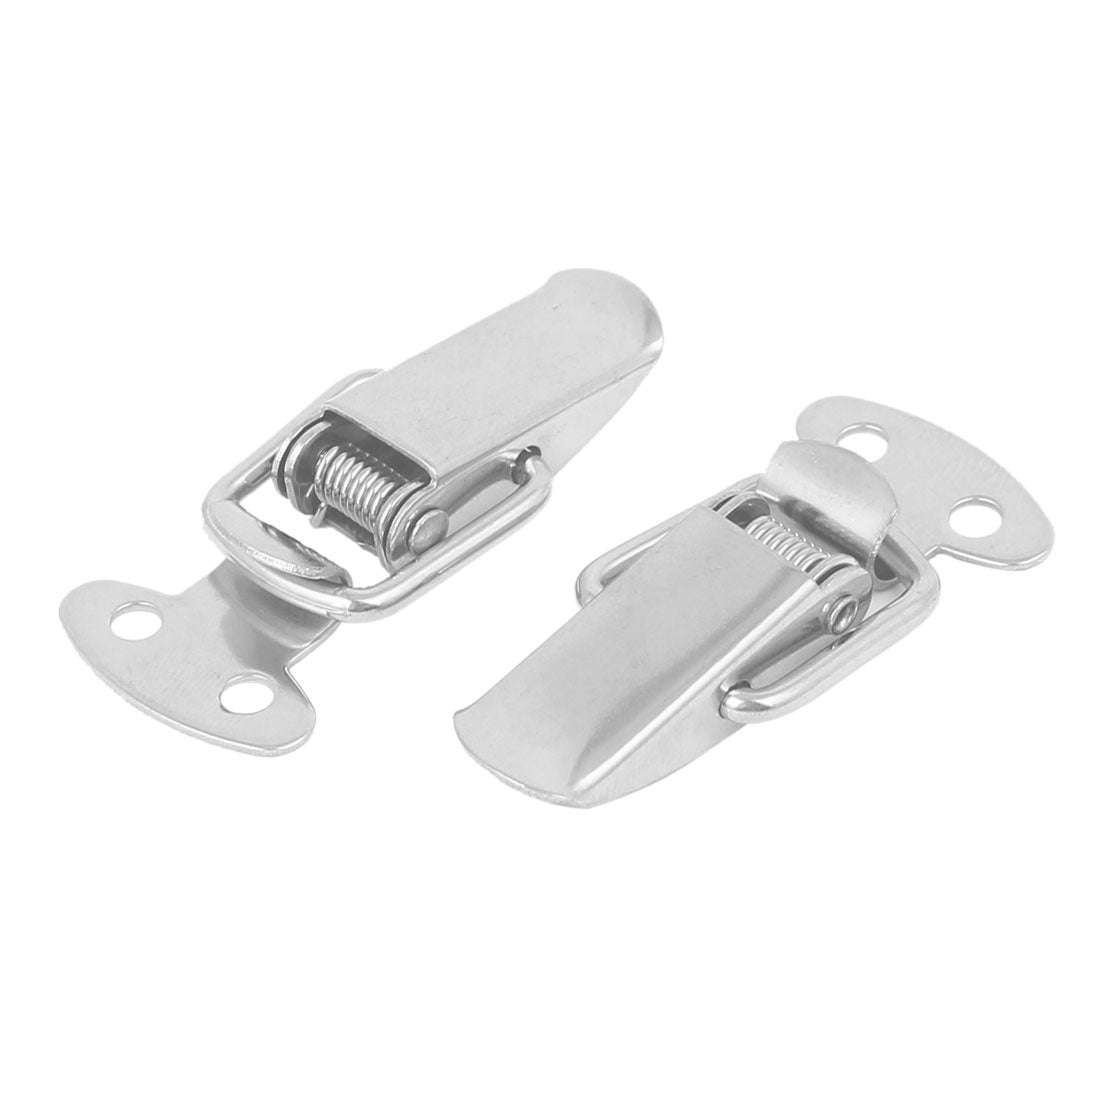 uxcell Uxcell Toolbox Drawer Stainless Steel Spring Toggle Latch Box Hasp 35mmx20mmx13mm 10pcs